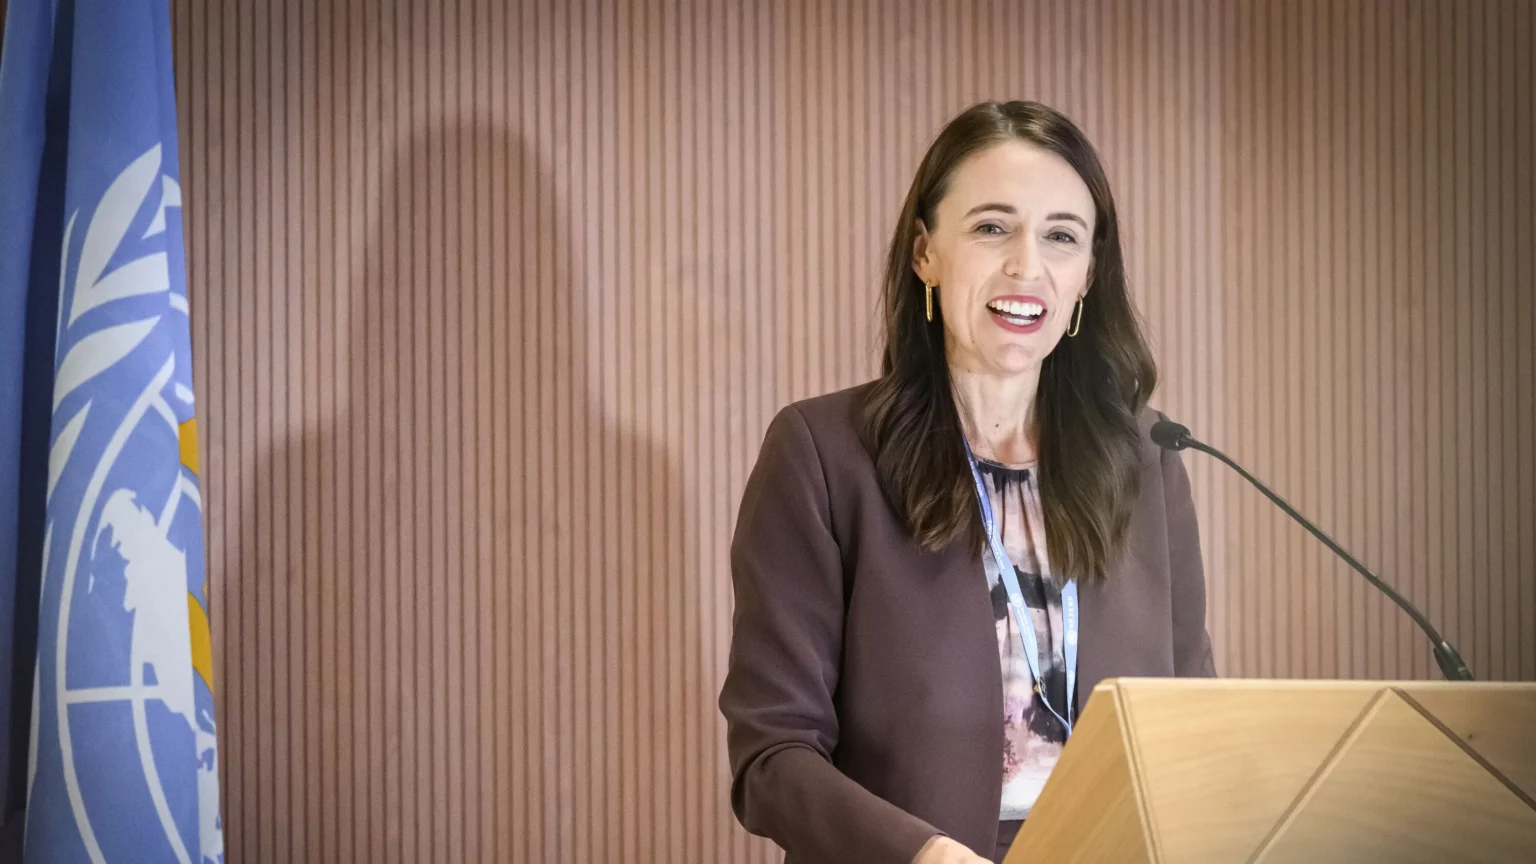 nz-ex-pm-jacinda-ardern-will-join-a-conservation-group-to-advocate-for-climate-action